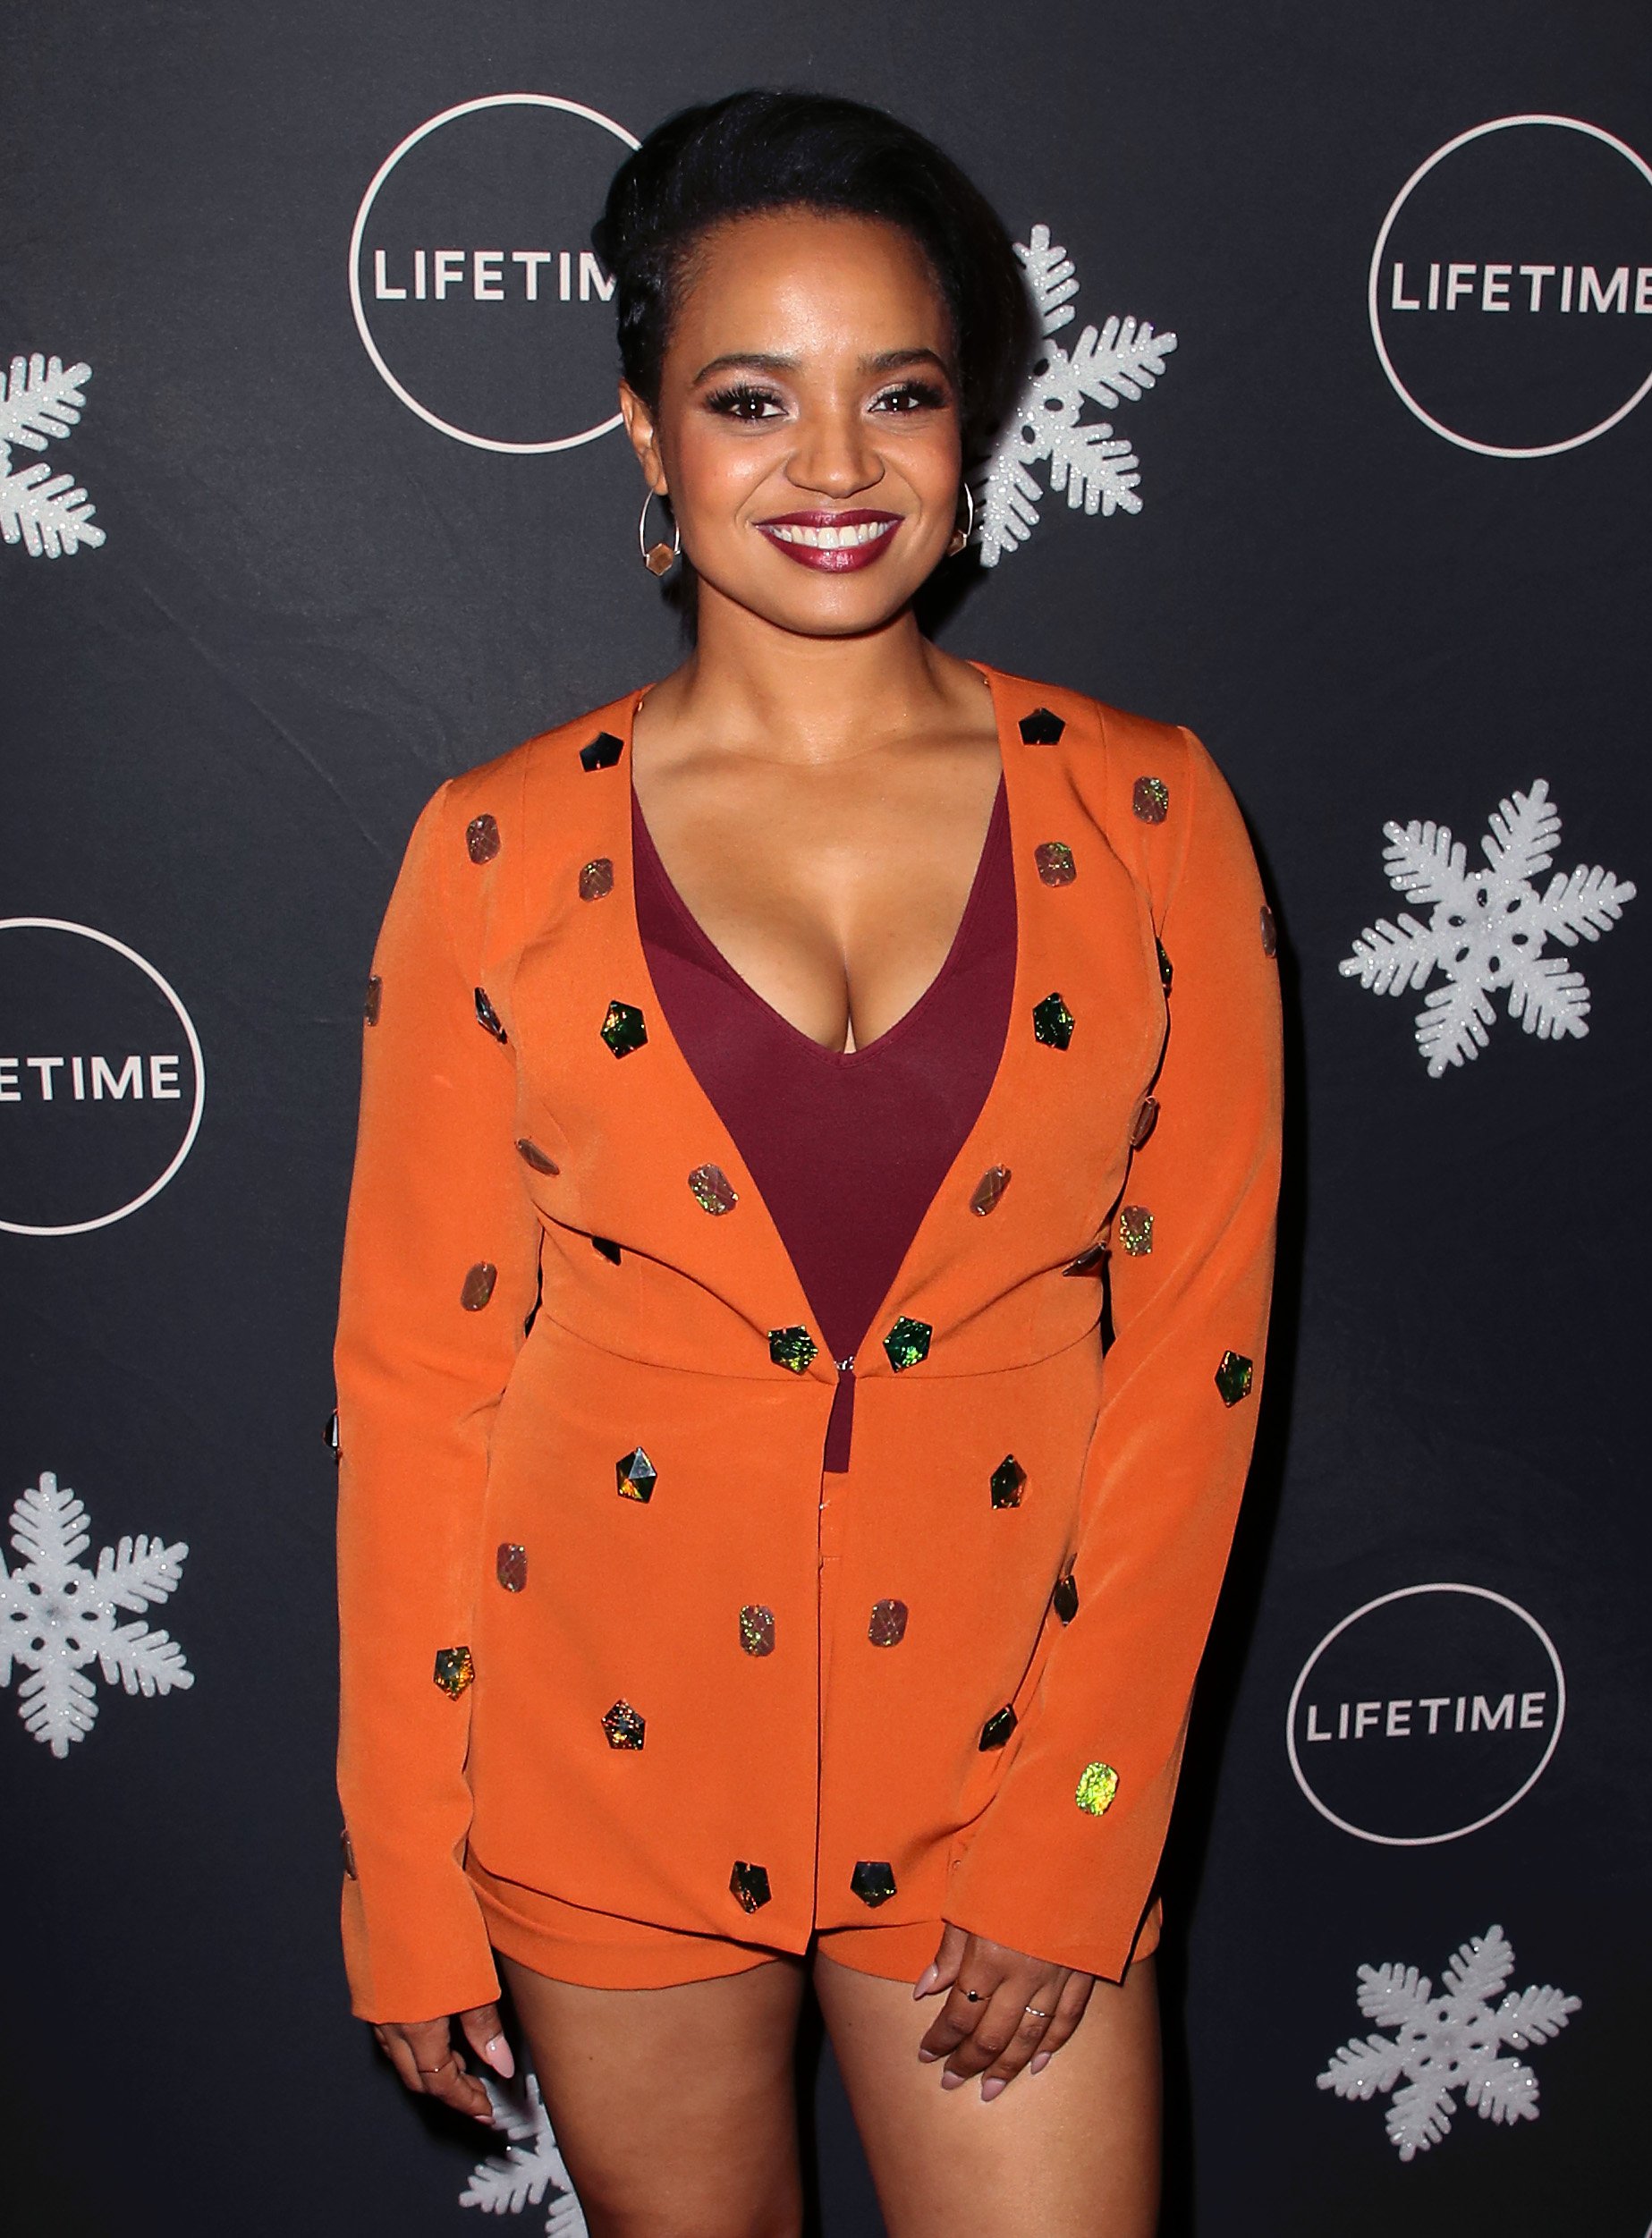 Kyla Pratt at the "It's A Wonderful Lifetime" Holiday Party at STK Los Angeles on October 22, 2019 in Los Angeles, California. |Source: Getty Images